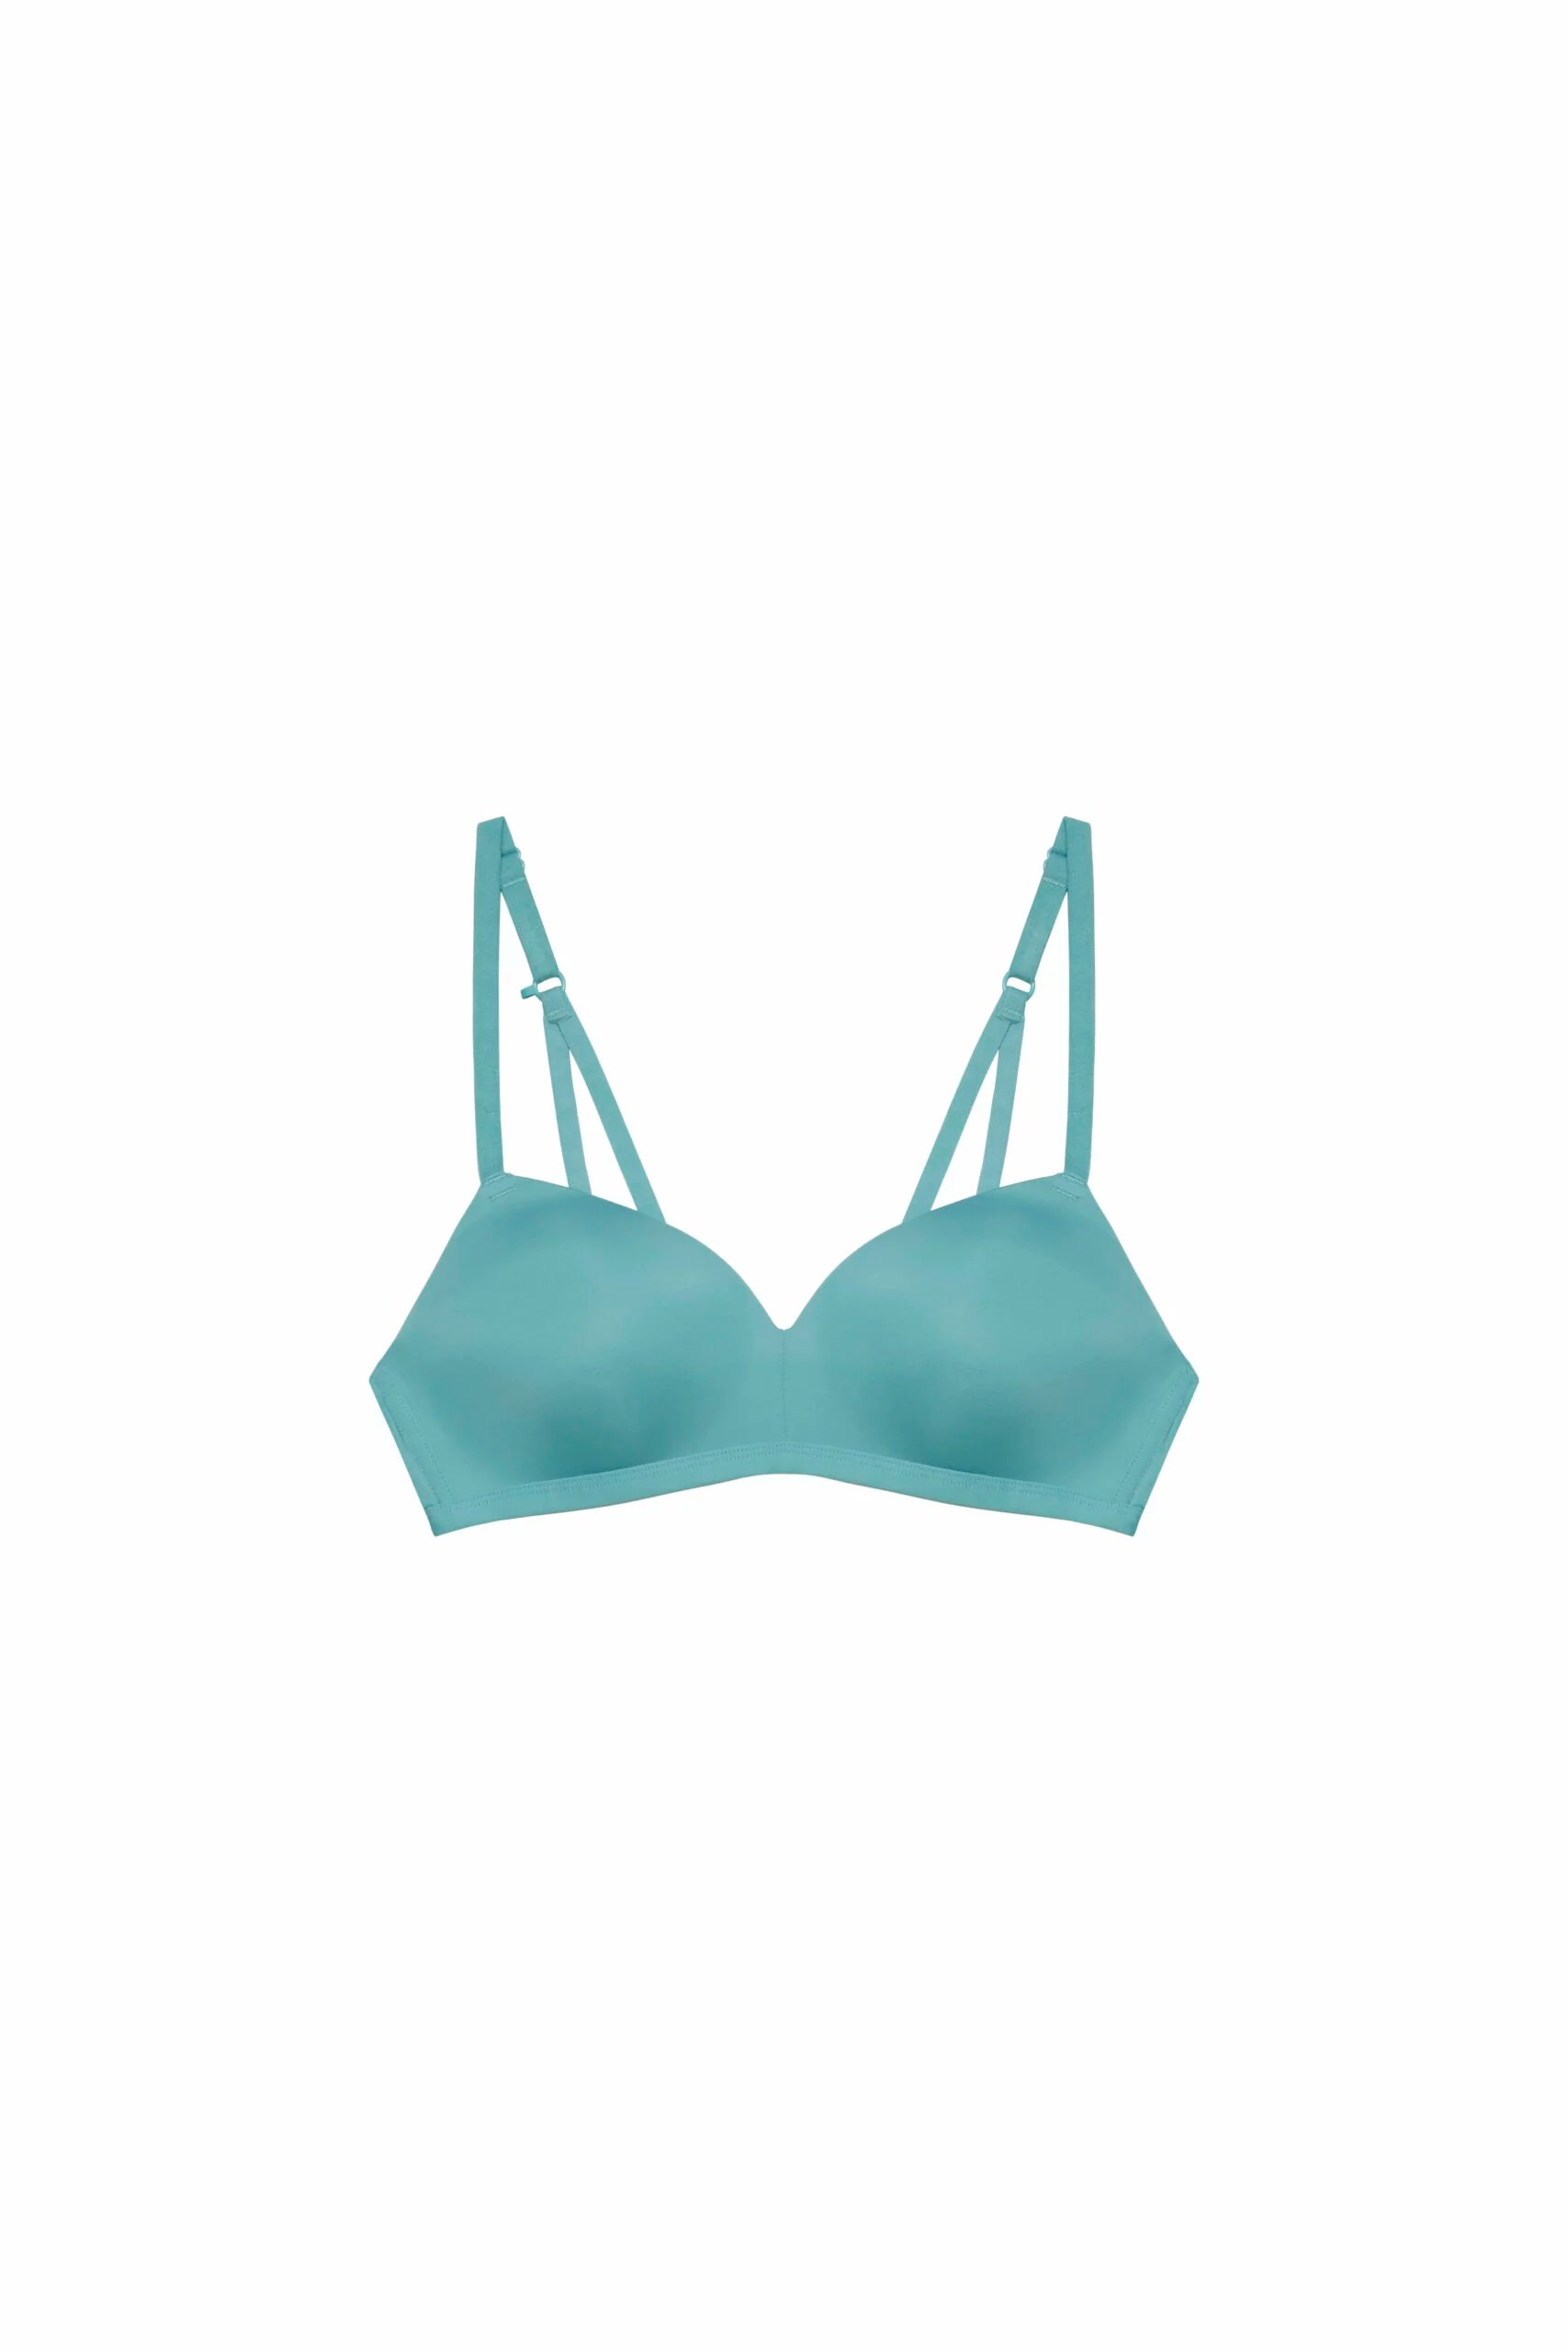 This New Plant-Based Bra Only Costs $14 at Walmart | Well+Good